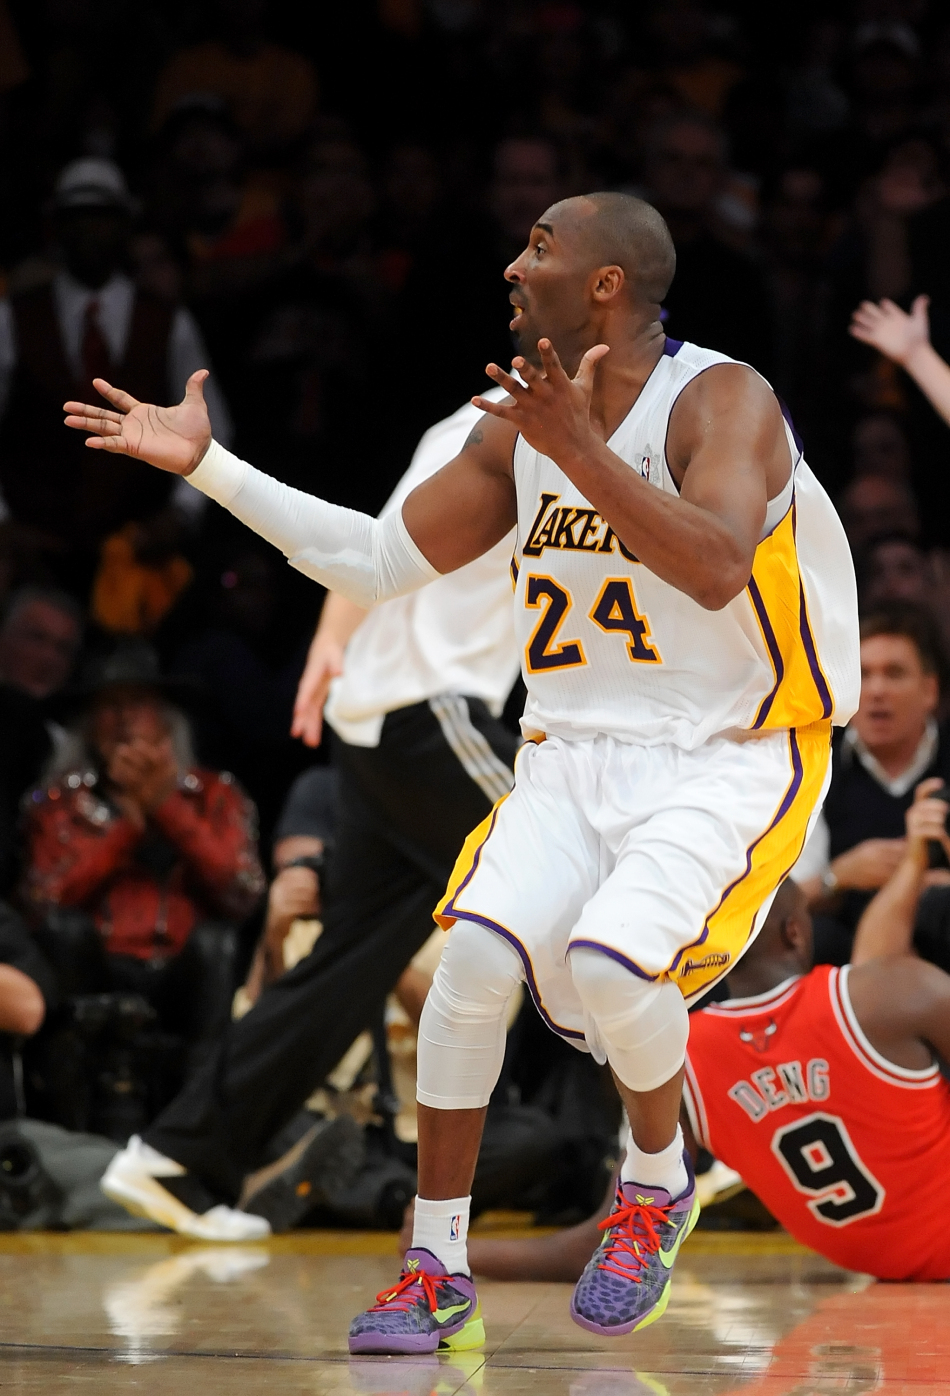  Kobe Bryant of the Los Angeles Lakers reacts during the game against the Chicago Bulls at Staples Center on December 25, 2011 in Los Angeles, California. [Source: Sina.com]